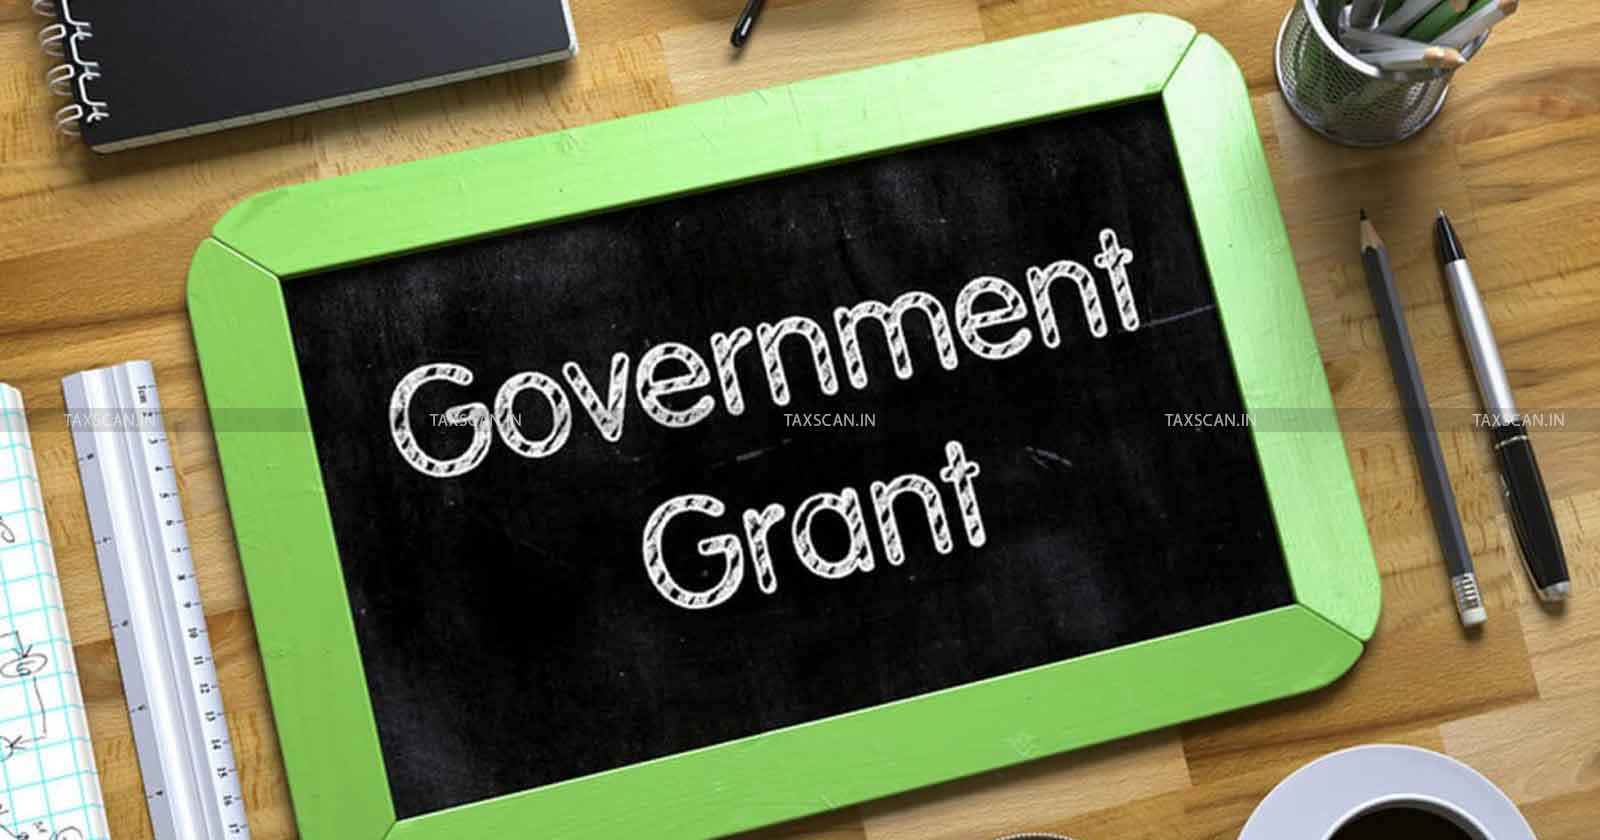 Govt Grants Received in Lieu of FRP - FRP - Cost - Cost of Capital Assets - ITAT - taxscan